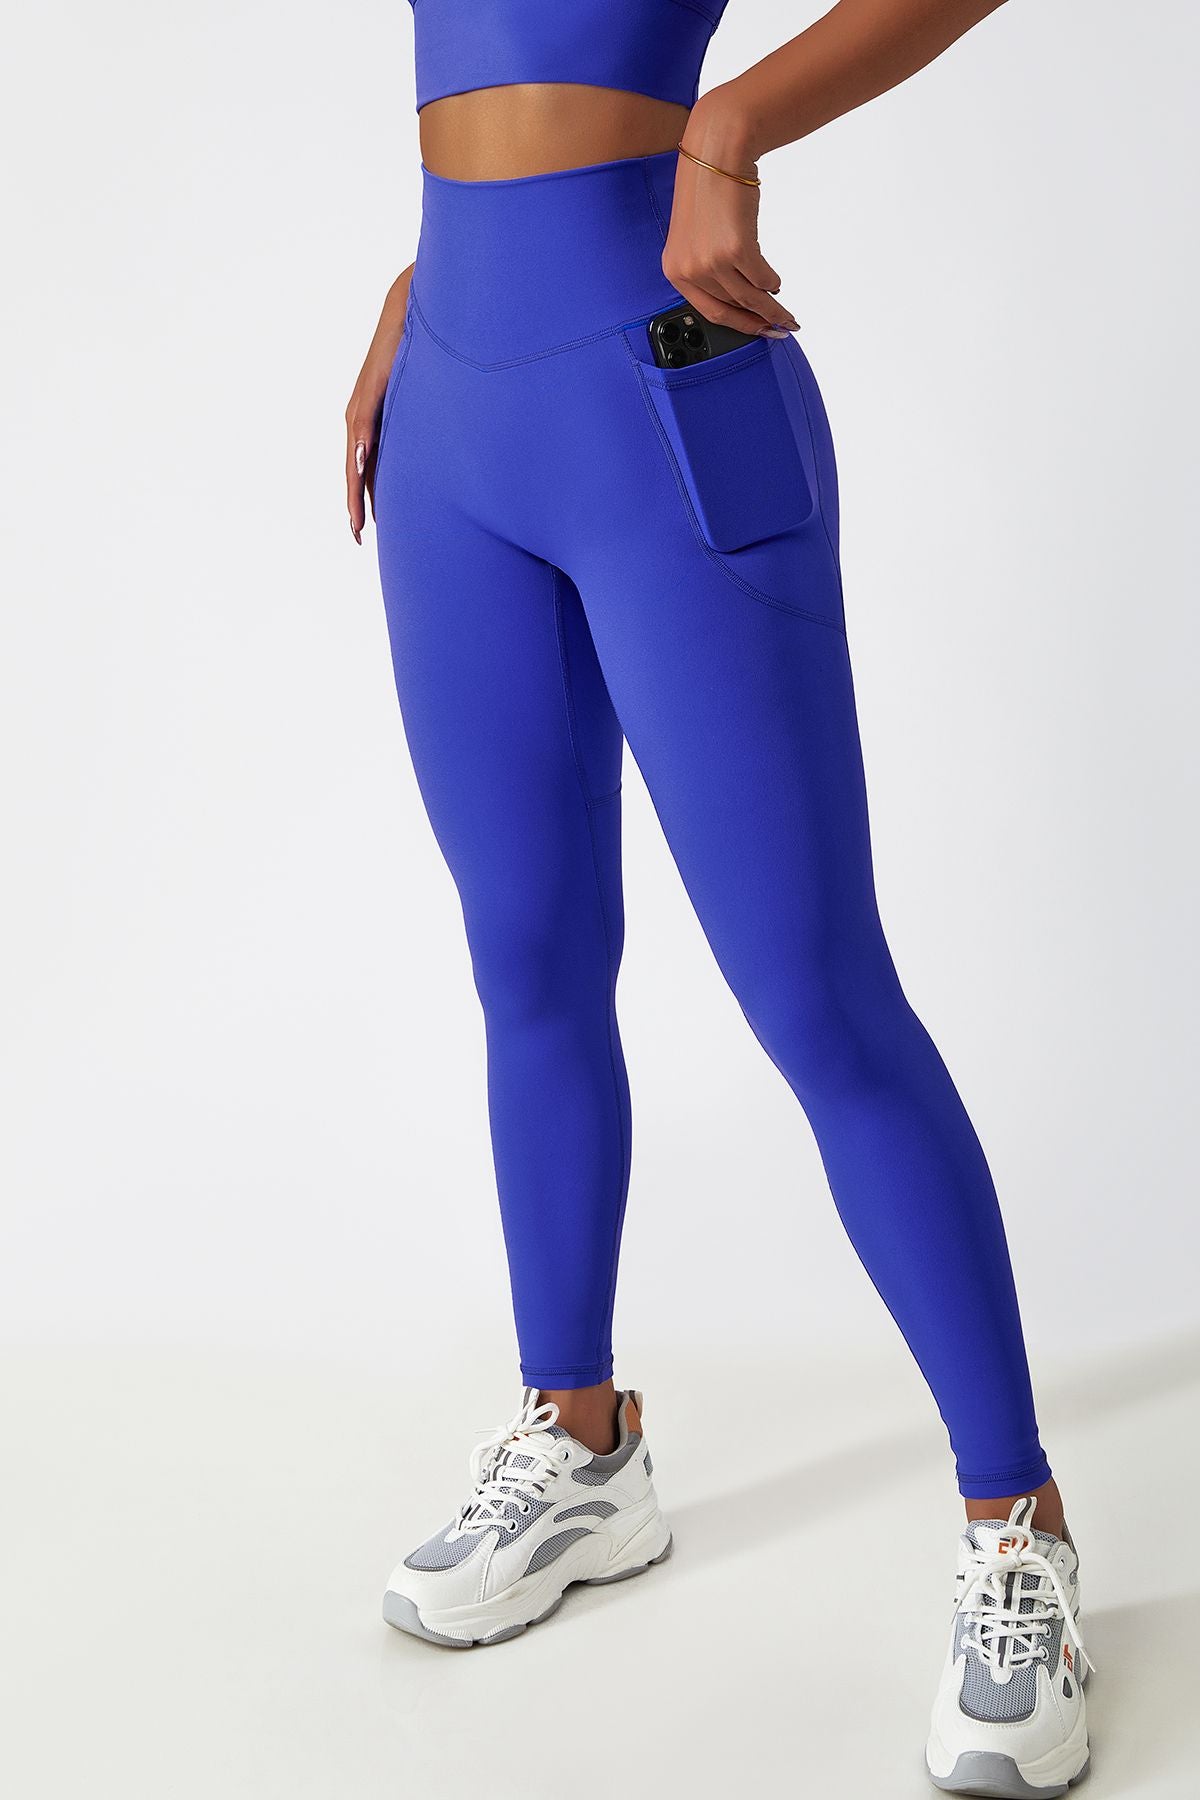 Cloud-Soft Workout Leggings with Pockets